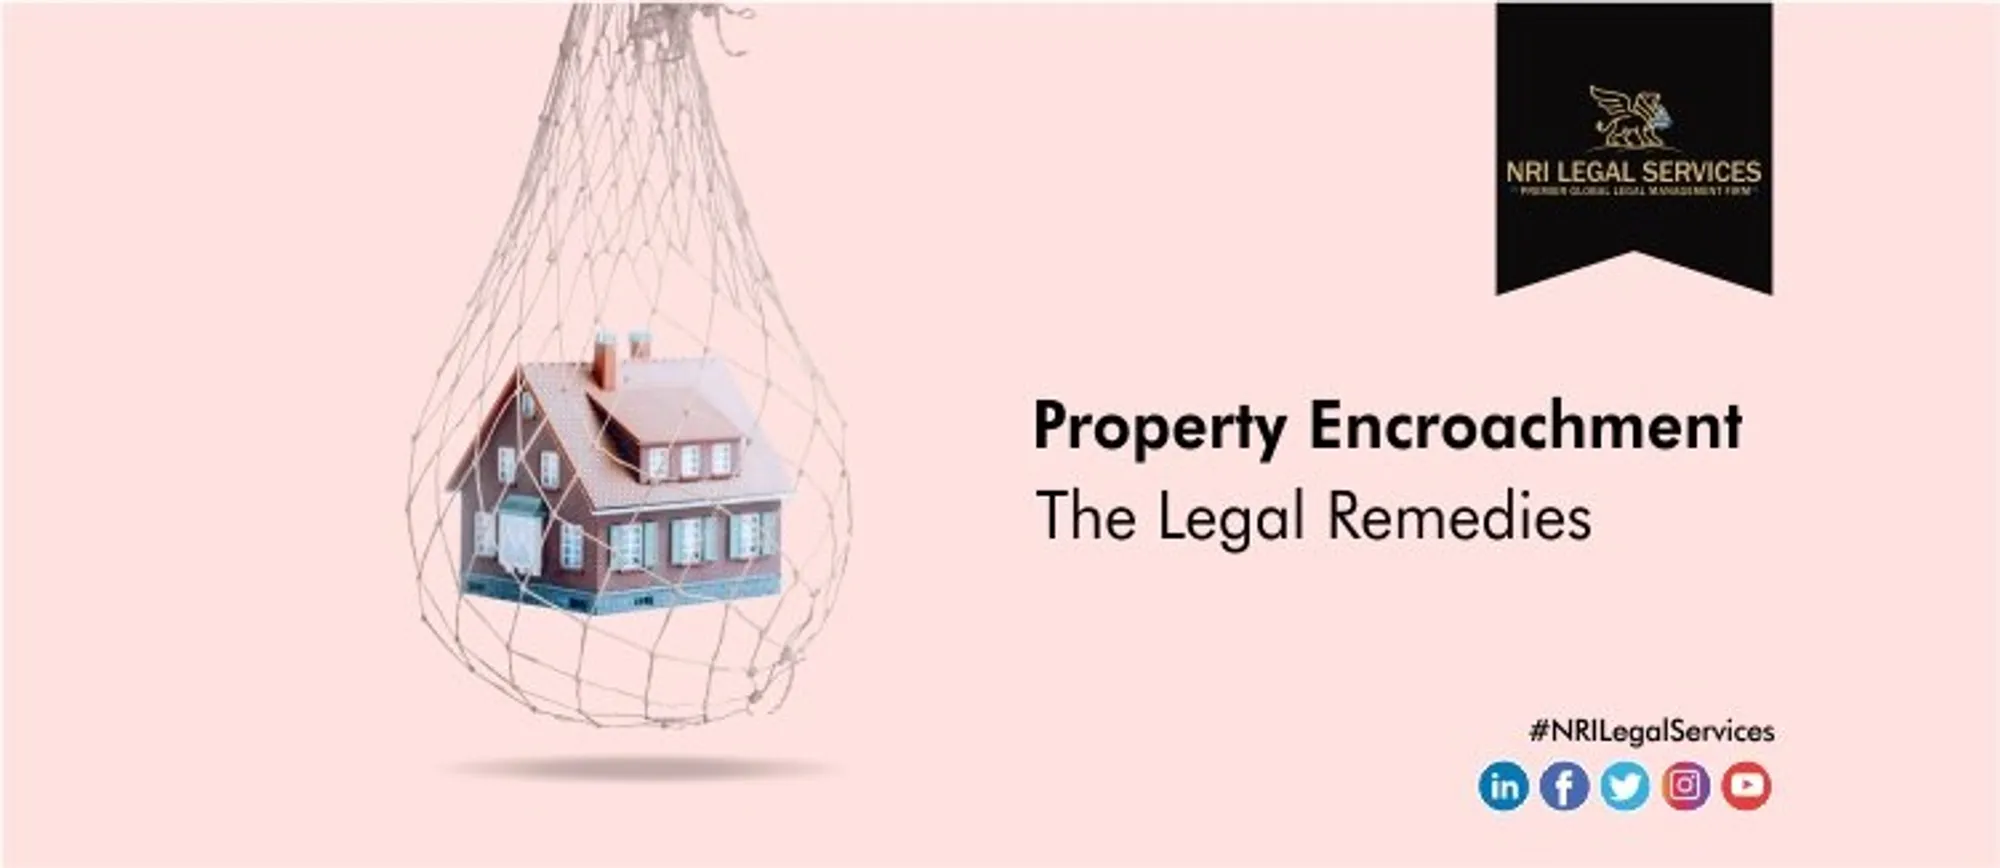 Legal remedies for encroachment of property by neighbor